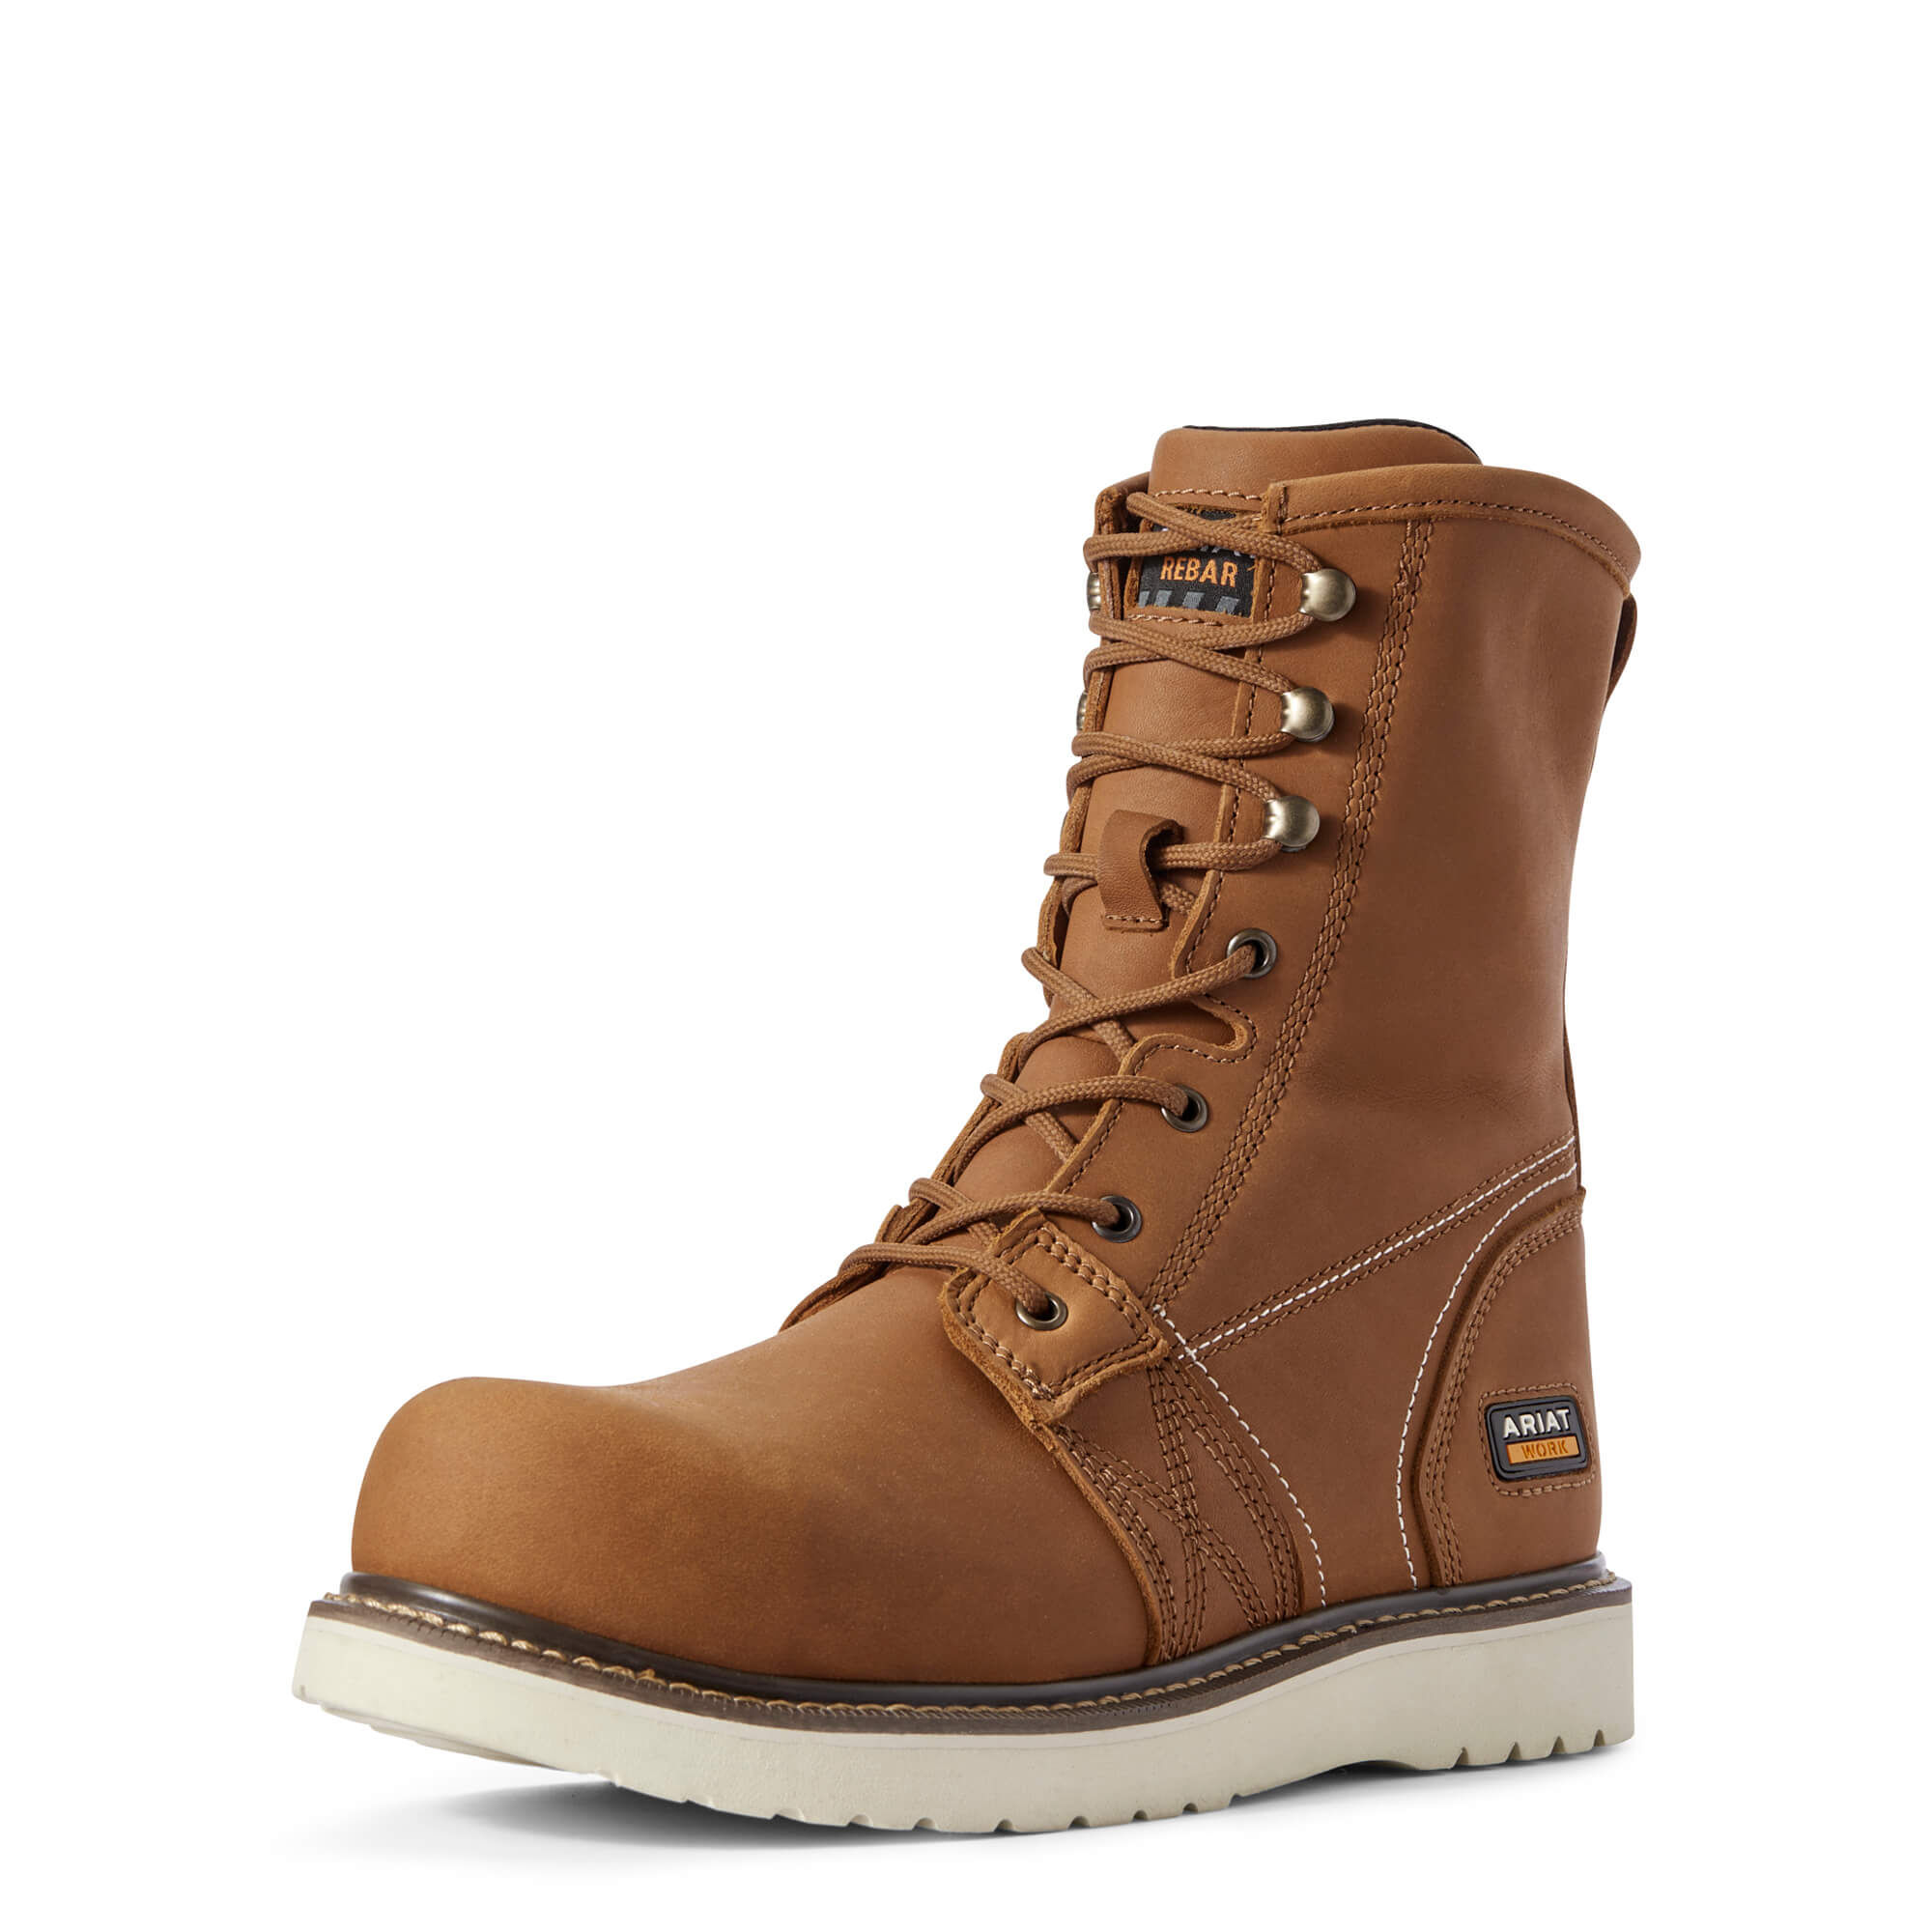 8 inch wedge sole work boots